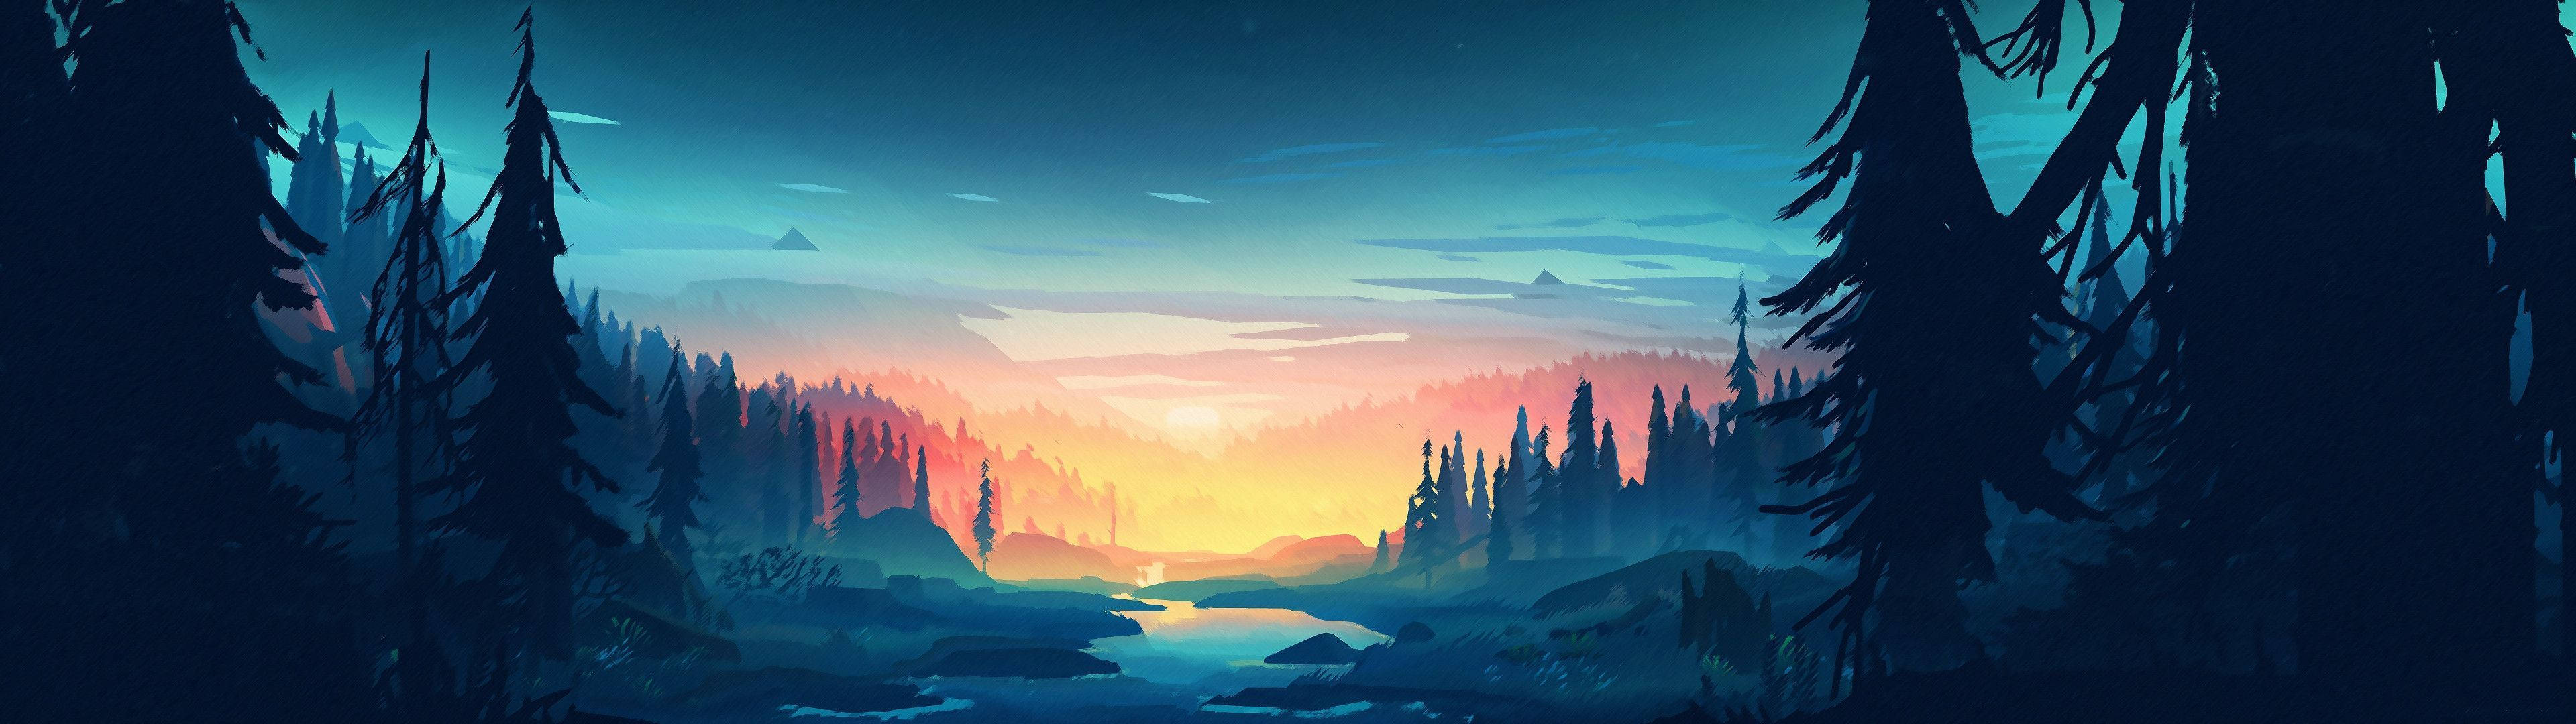 4k Dual Monitor Art Of Forest At Sunset